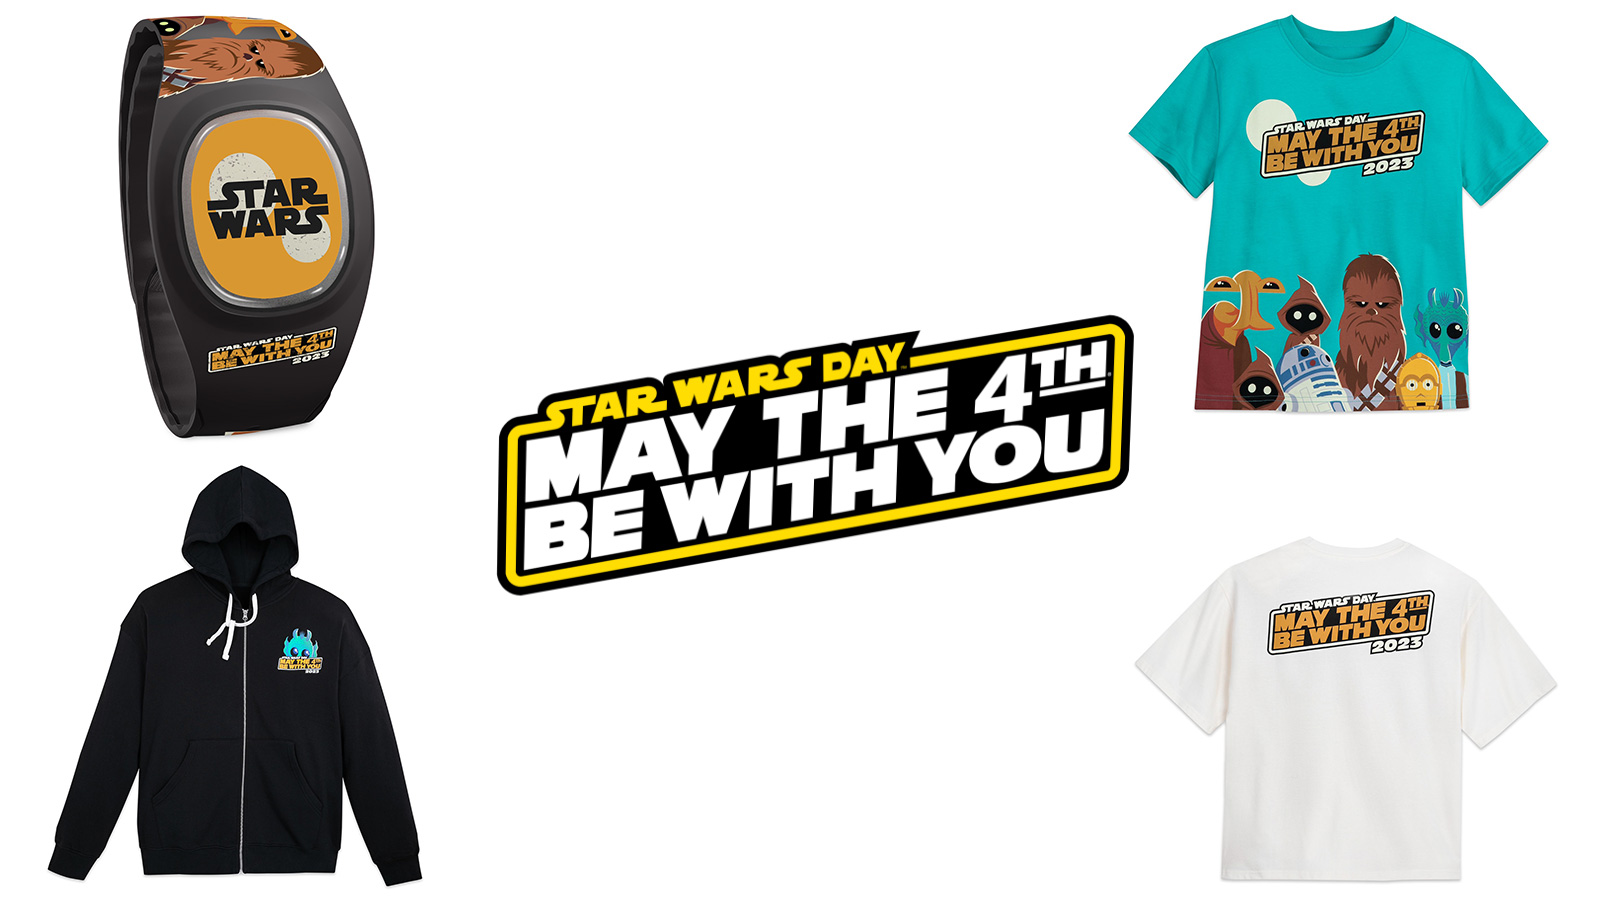 Disney Press Release - Shop Disney Launches Star Wars May the 4th 2023 Collection